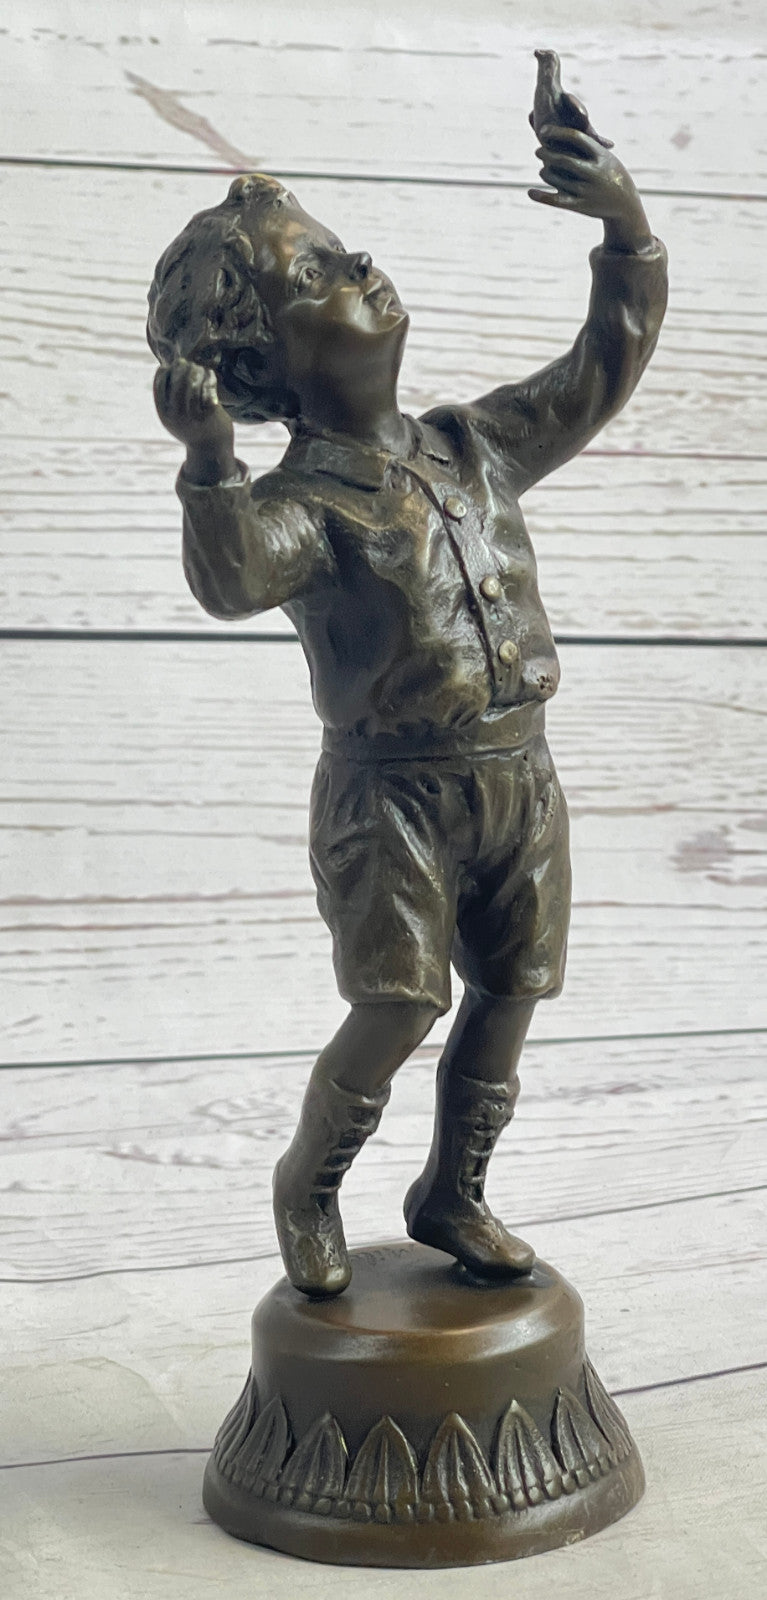 Milo`s Artistry: Intricate Bronze Statue of a Boy Holding a Bird - Handmade by Miguel Lopez